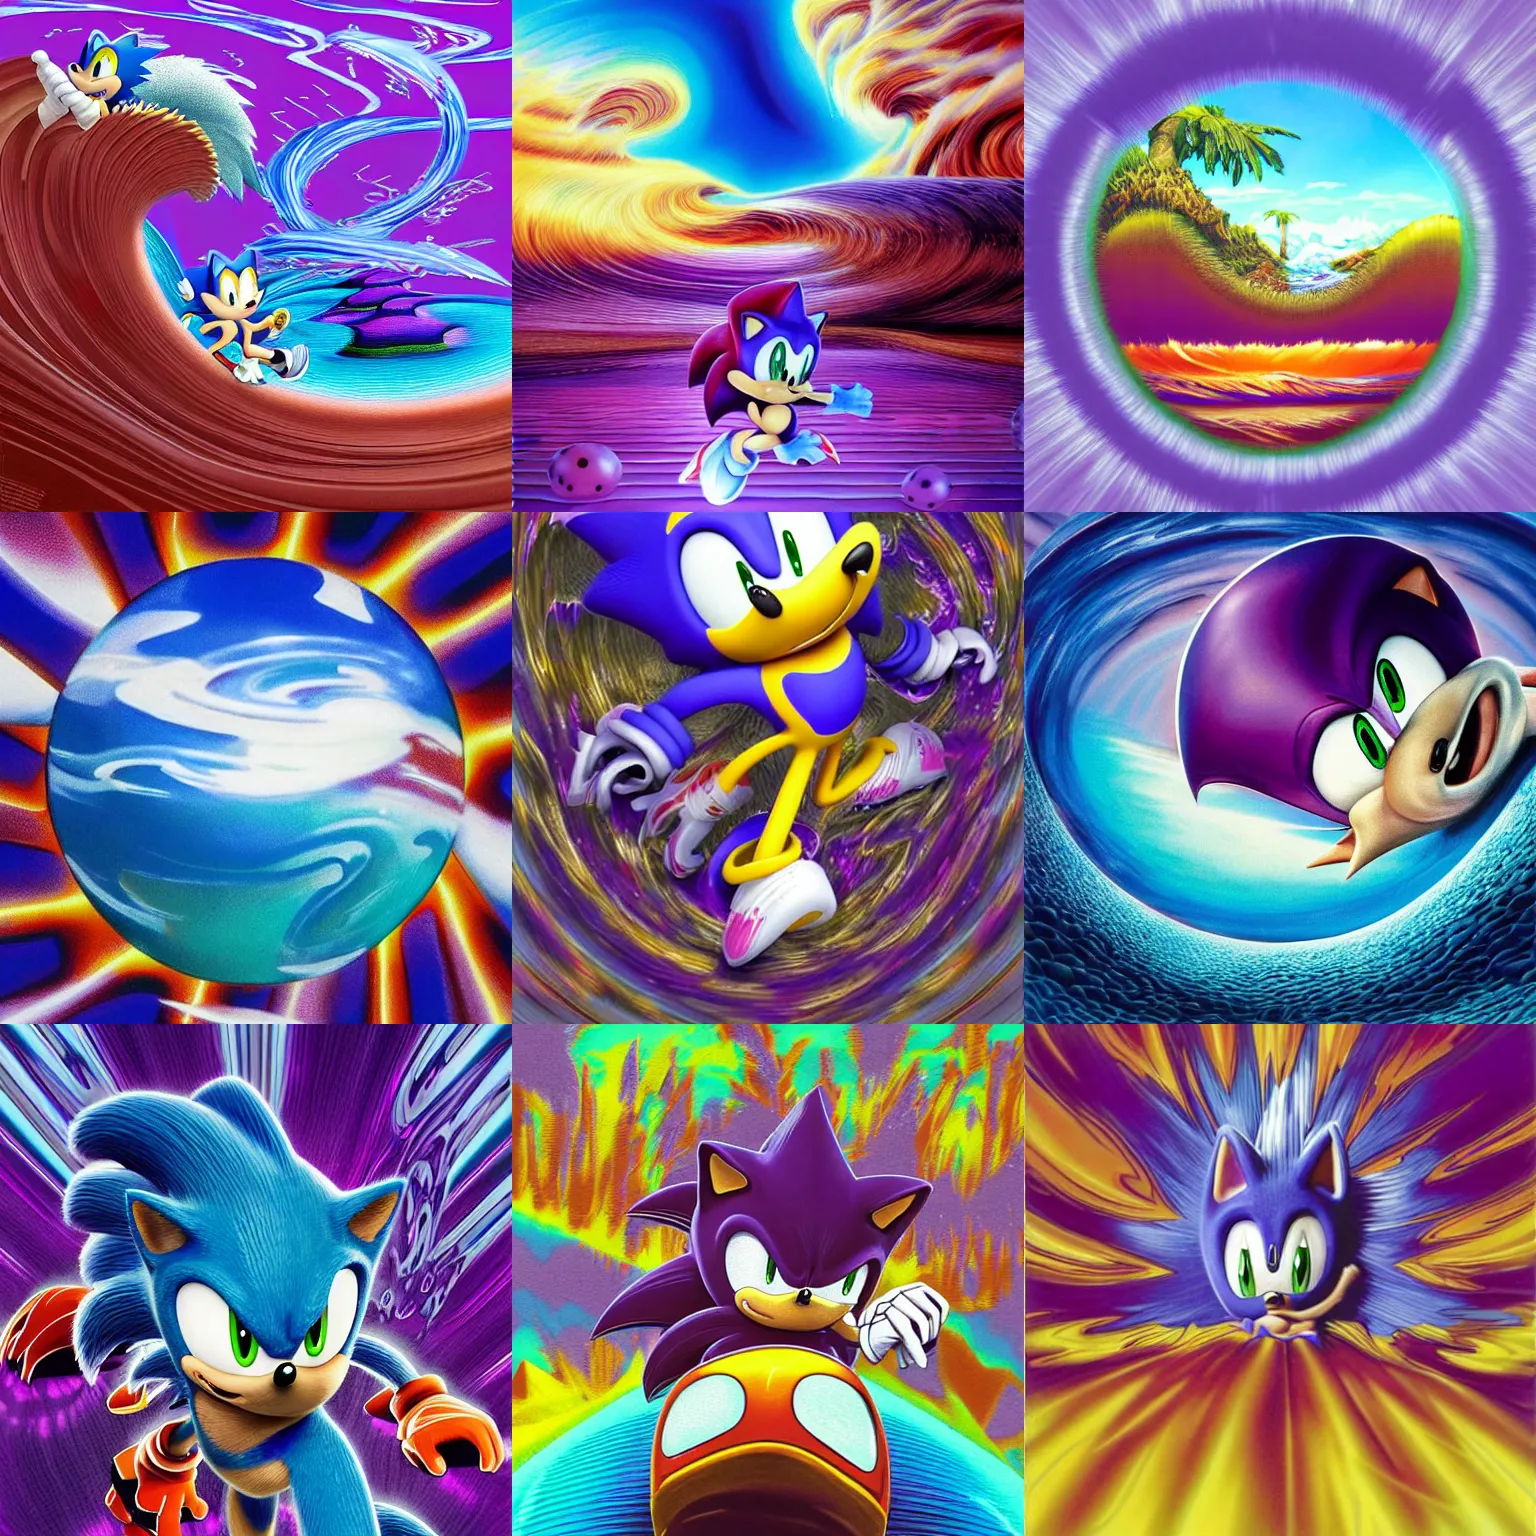 Prompt: wave - reflected portrait of sonic hedgehog and a matte painting landscape of a surreal, sharp, detailed professional, soft pastels, high quality airbrush art album cover of a liquid dissolving airbrush art lsd dmt sonic the hedgehog swimming through cyberspace, purple checkerboard background, 1 9 9 0 s 1 9 9 2 sega genesis rareware video game album cover